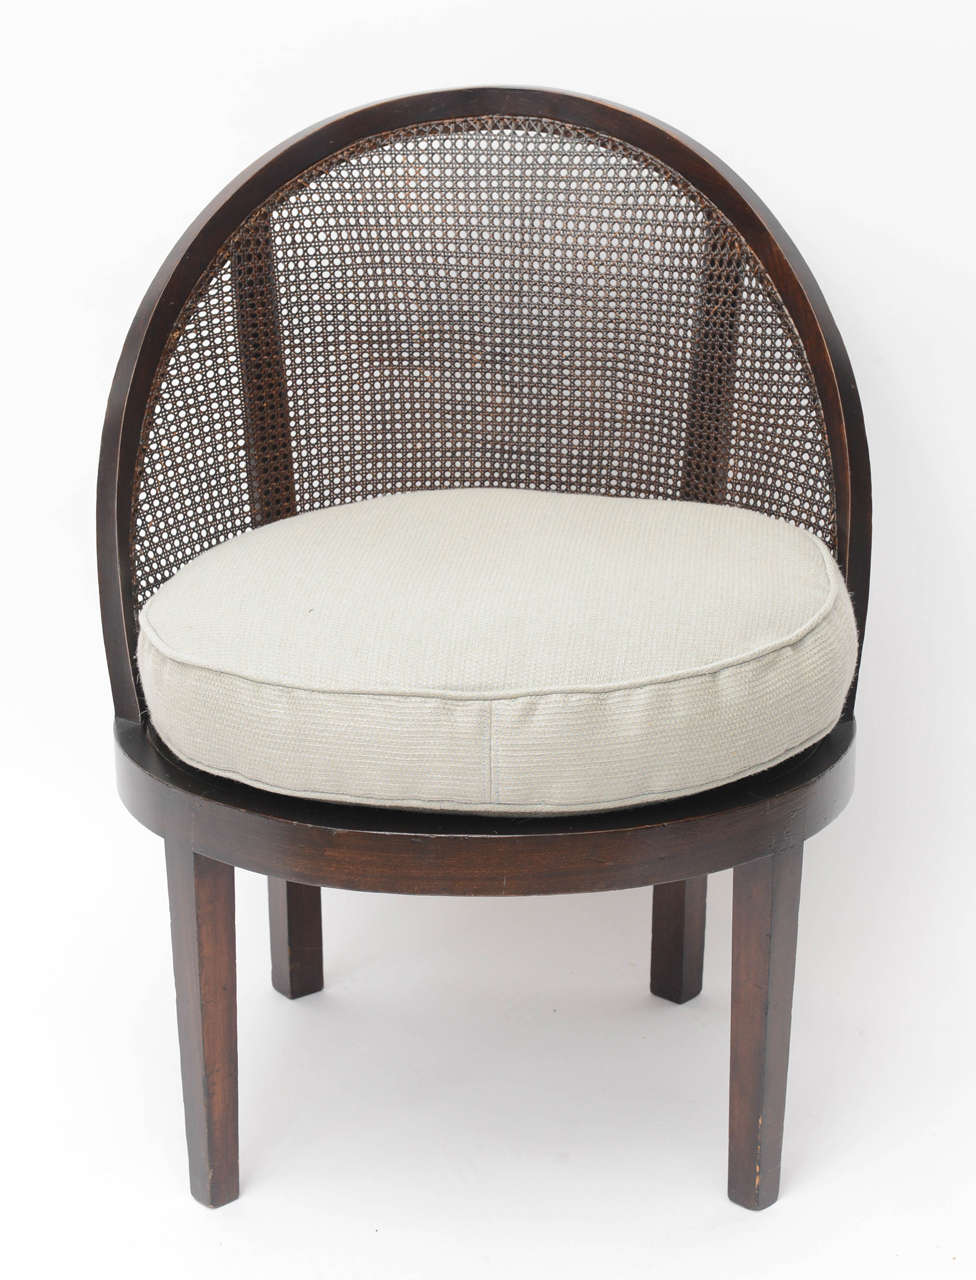 Mahogany cane back single chair with newly upholstered linen cushion. Perfect for living room, bedroom or library.